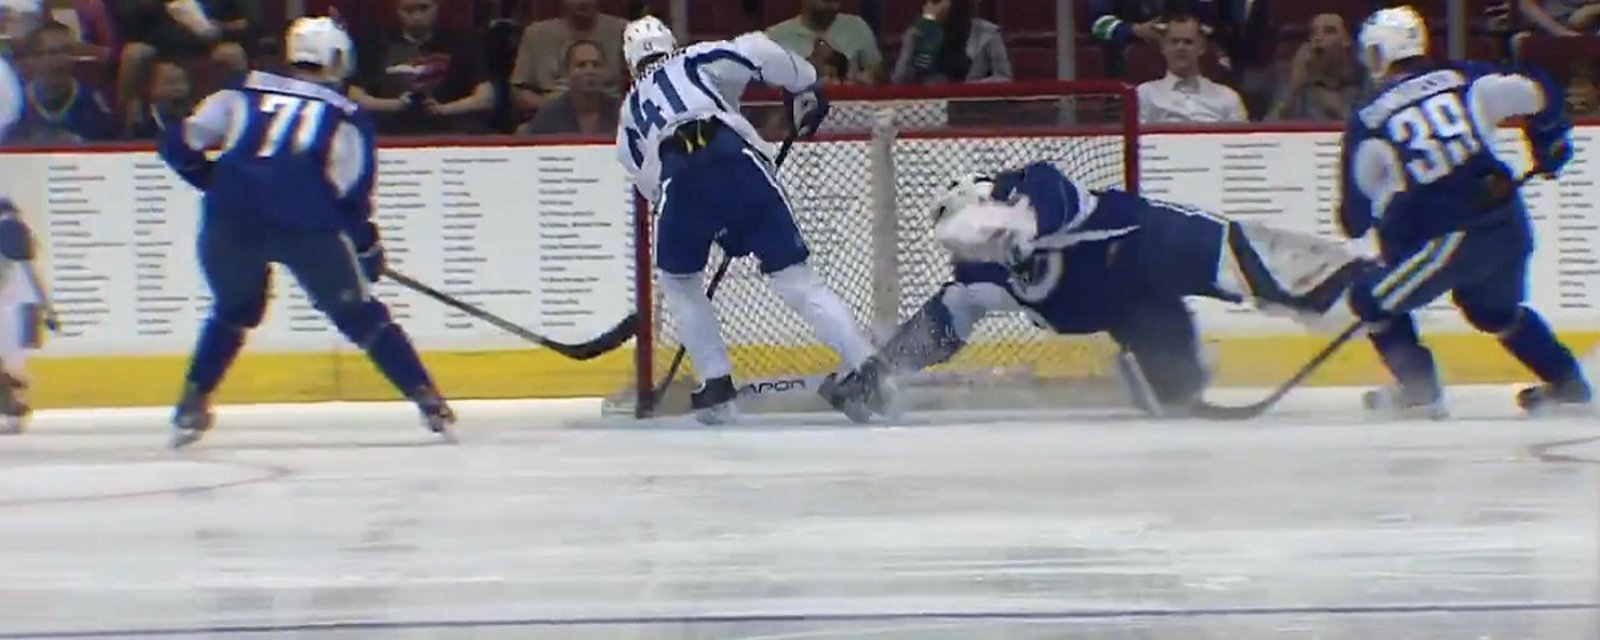 First round pick shows off his nasty moves in development camp.